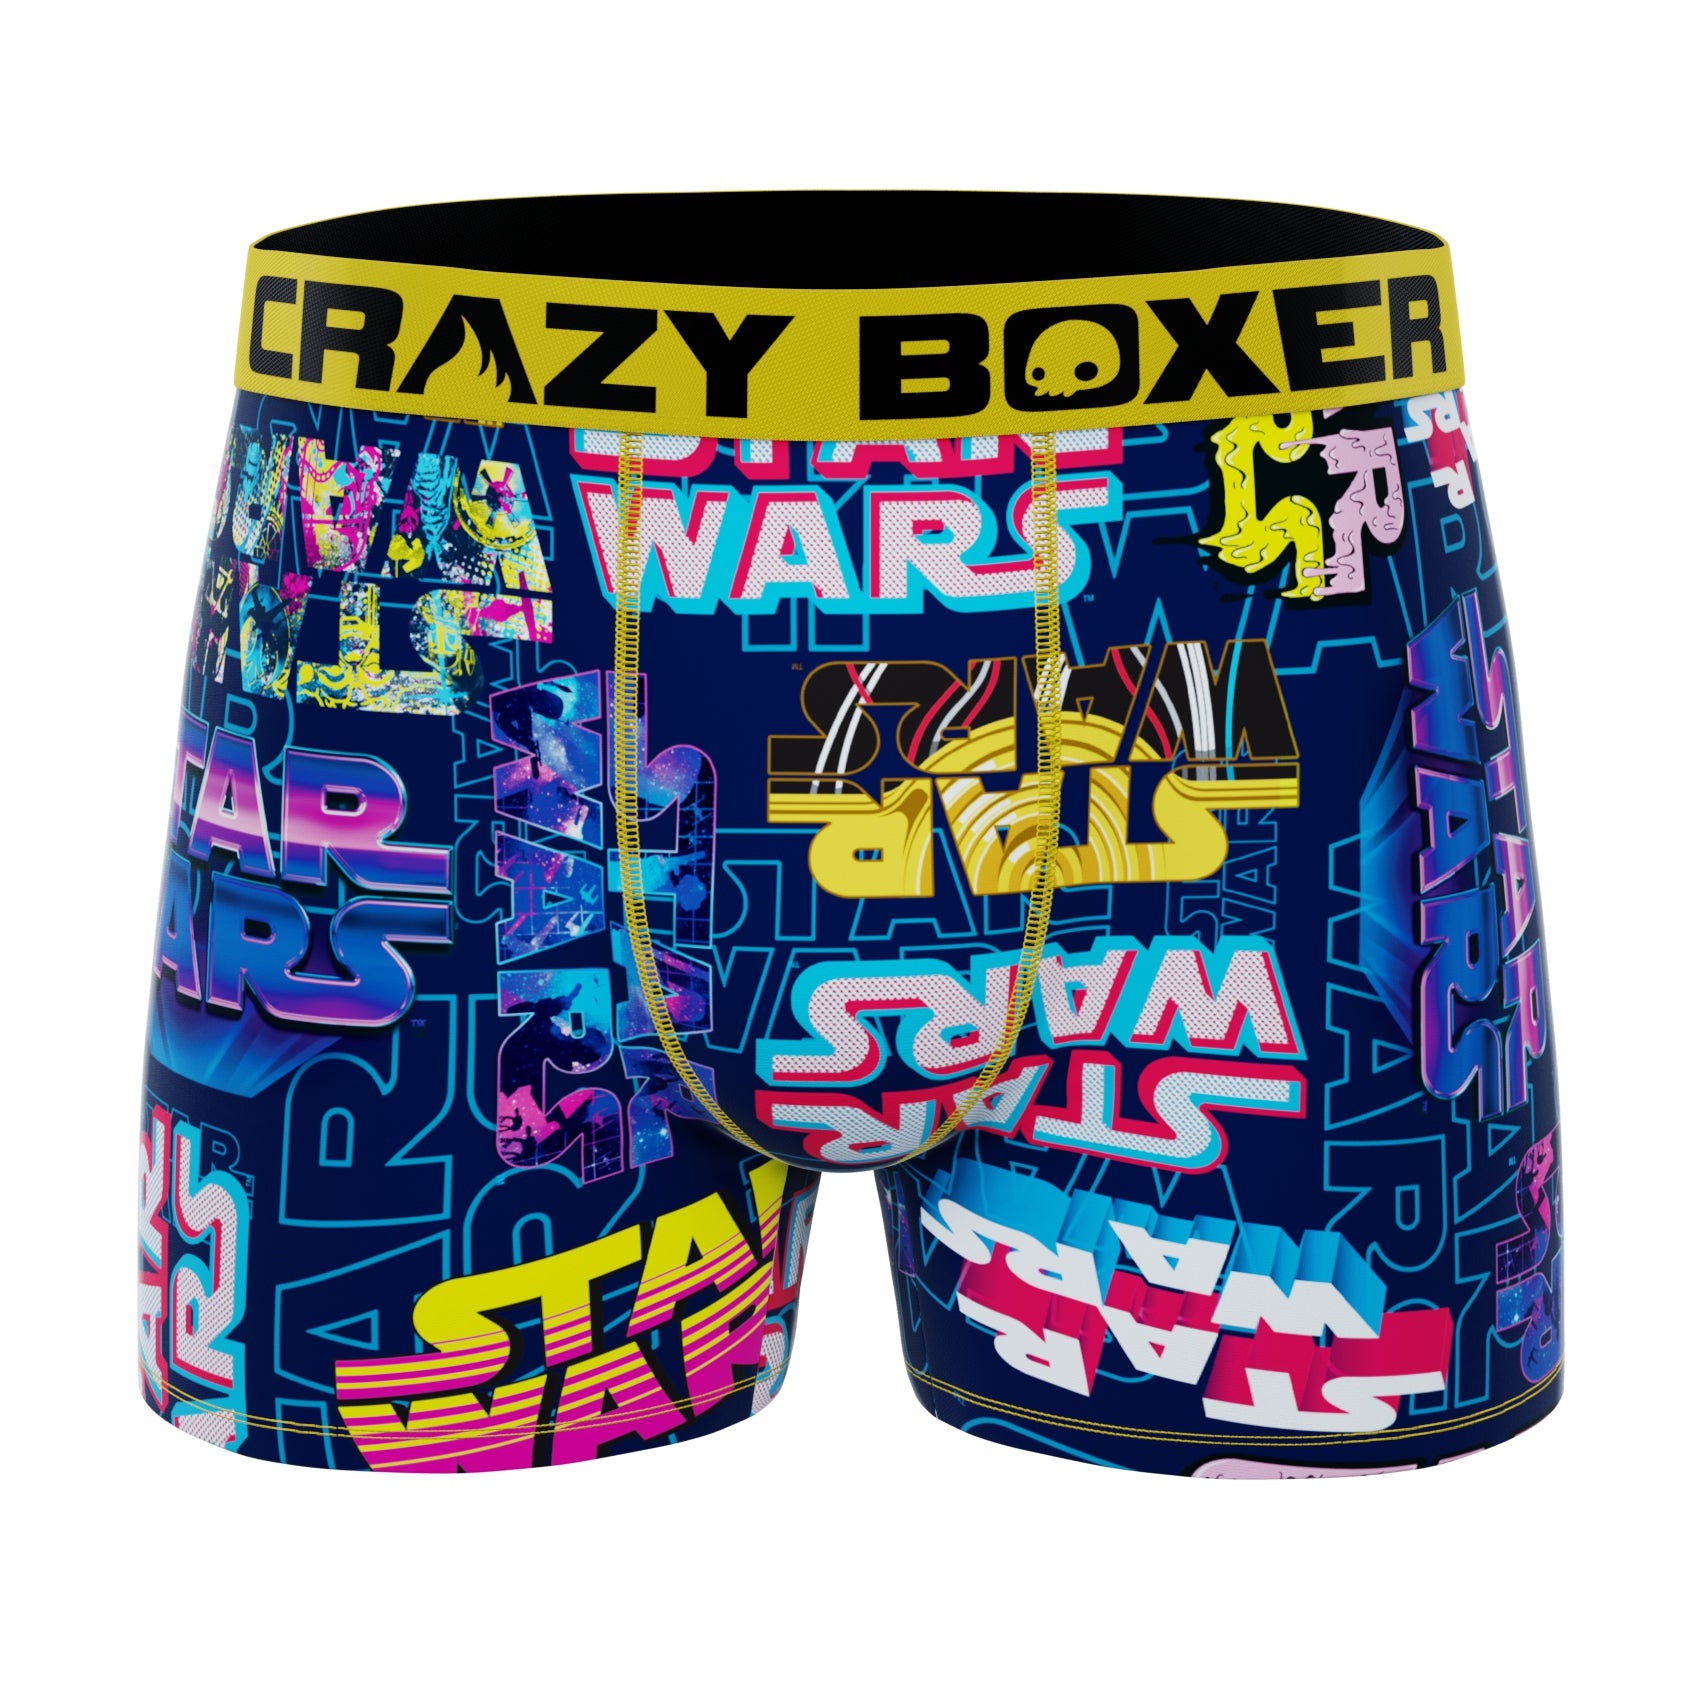 Crazy Boxers Star Wars Jabba The Hutt Boxer Briefs in Cereal Box